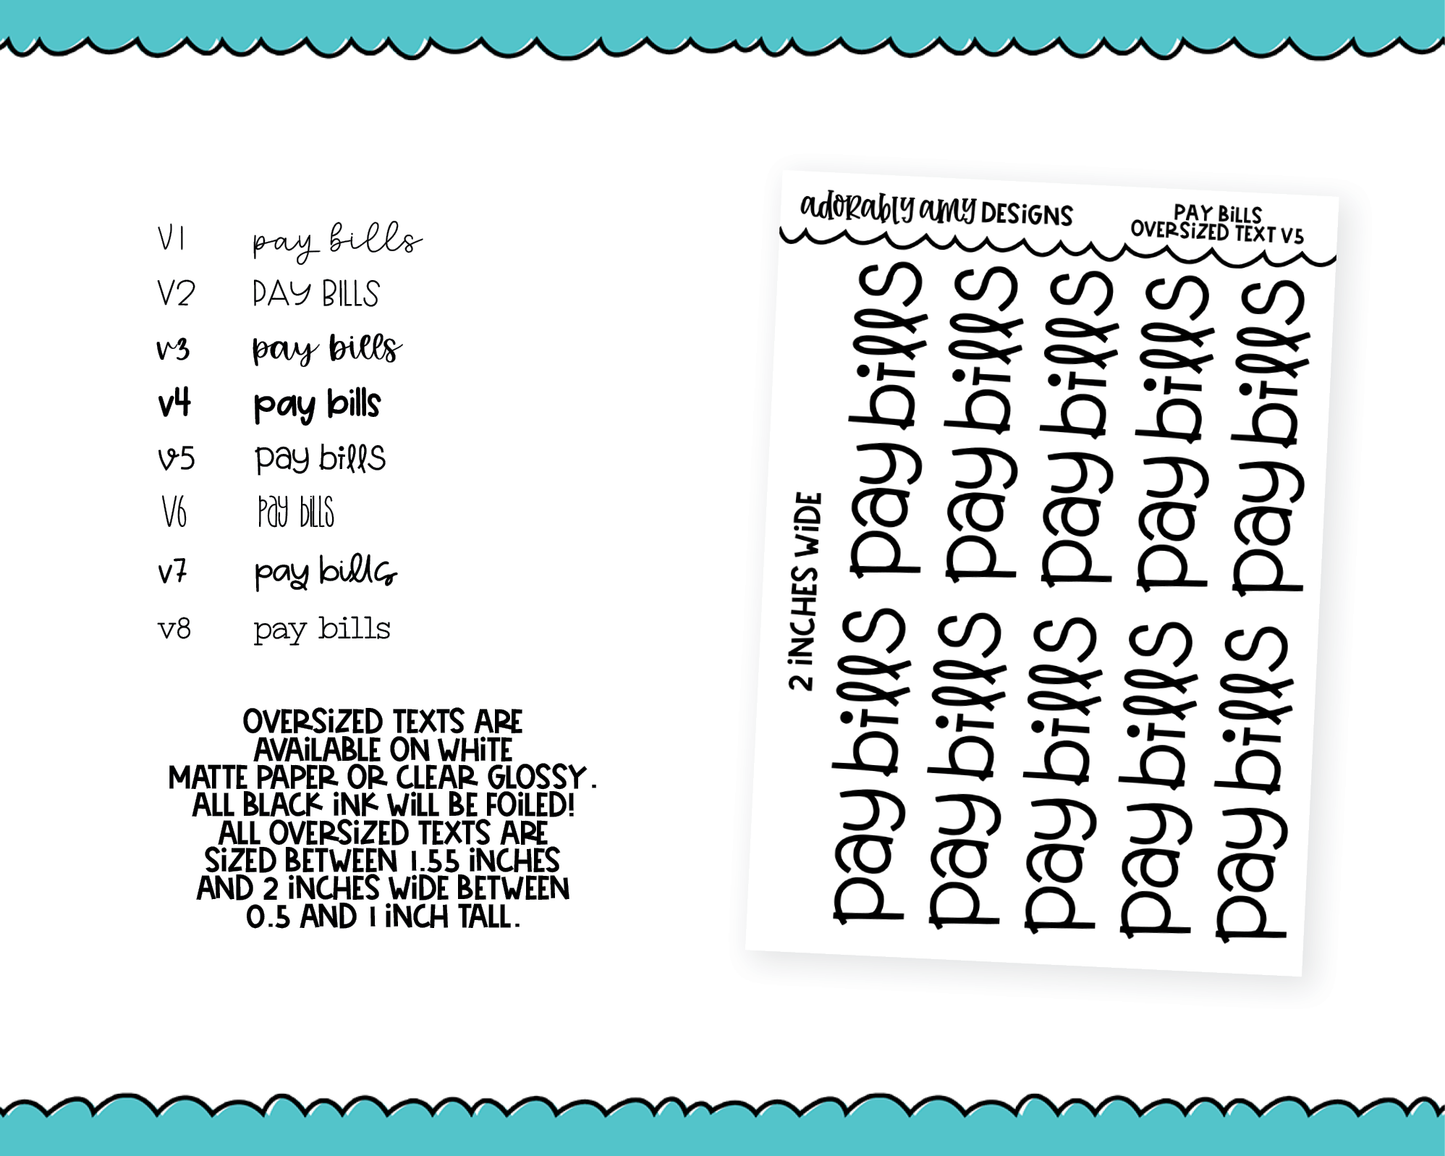 Foiled Oversized Text - Pay Bills Large Text Planner Stickers